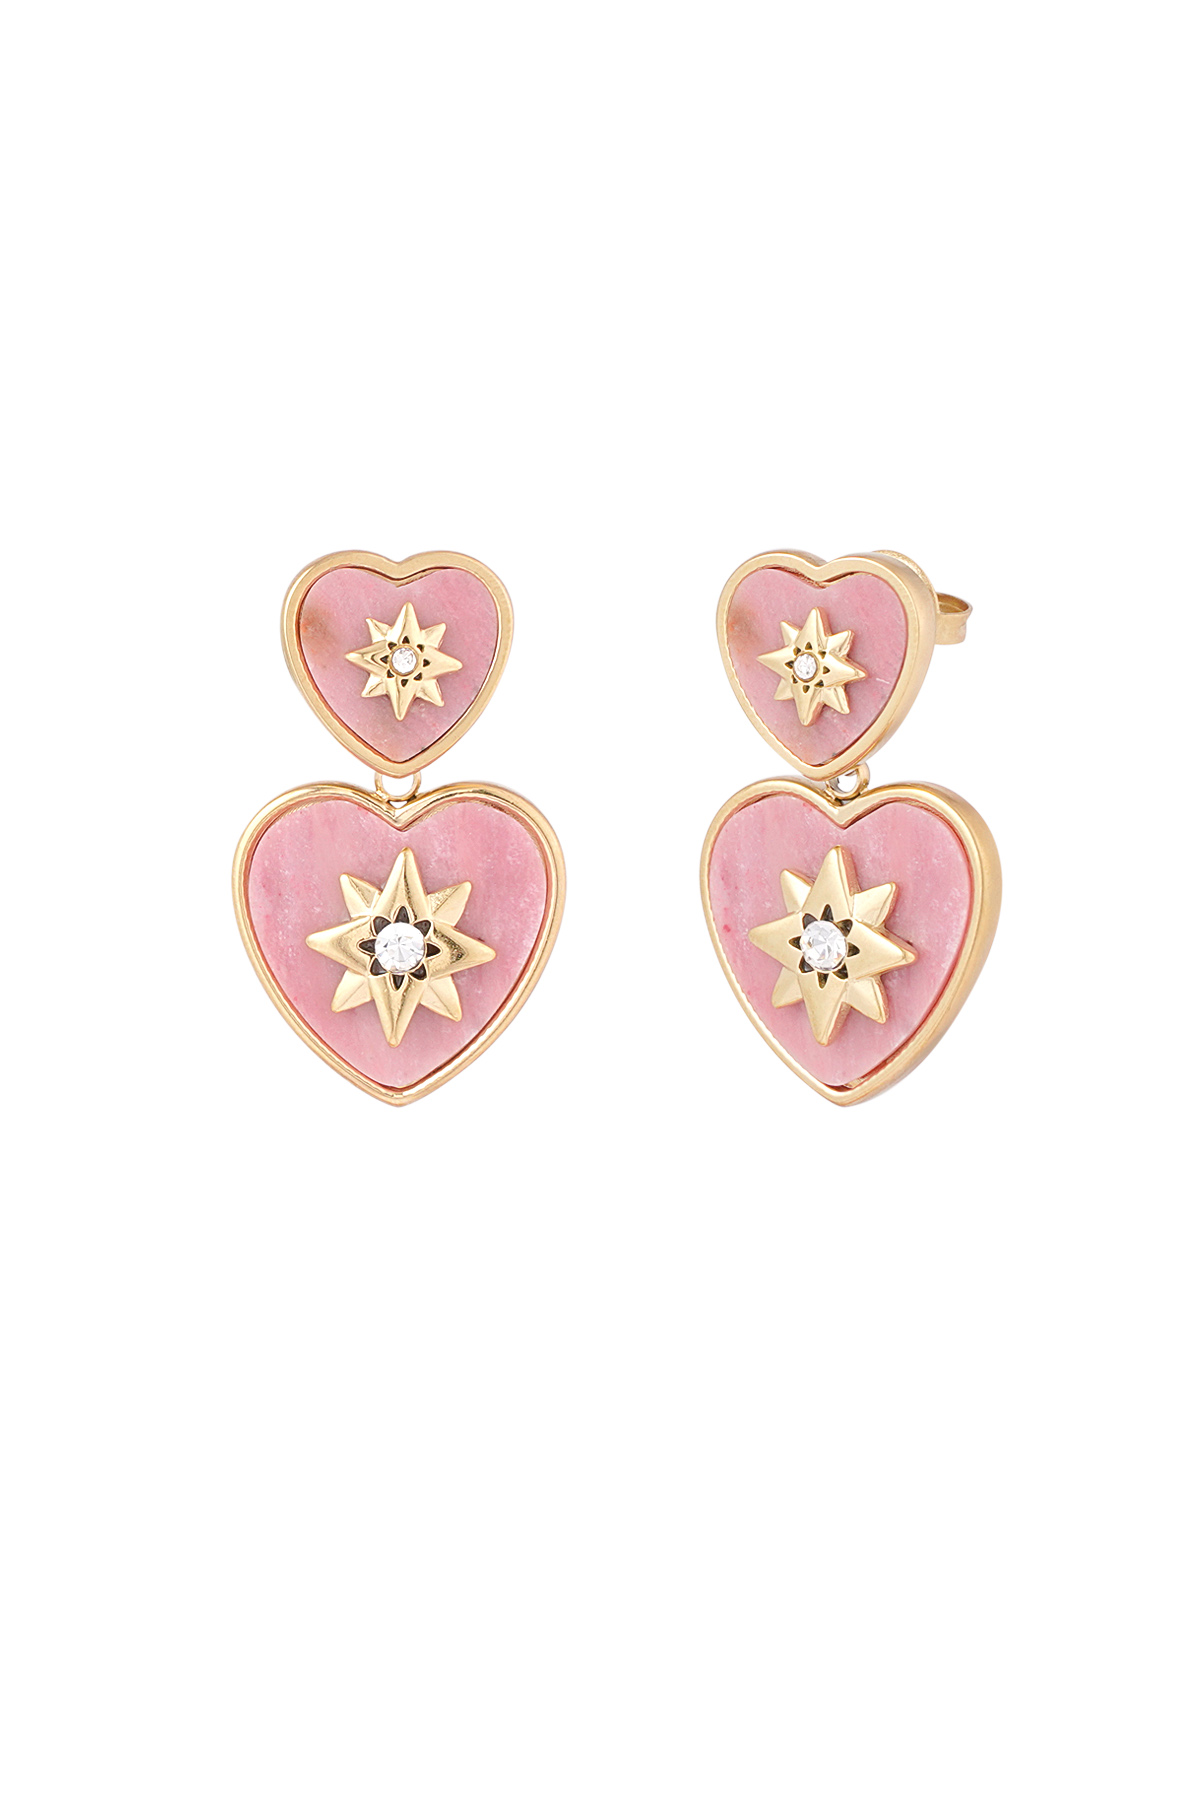 Heart earrings with compass - rose gold h5 